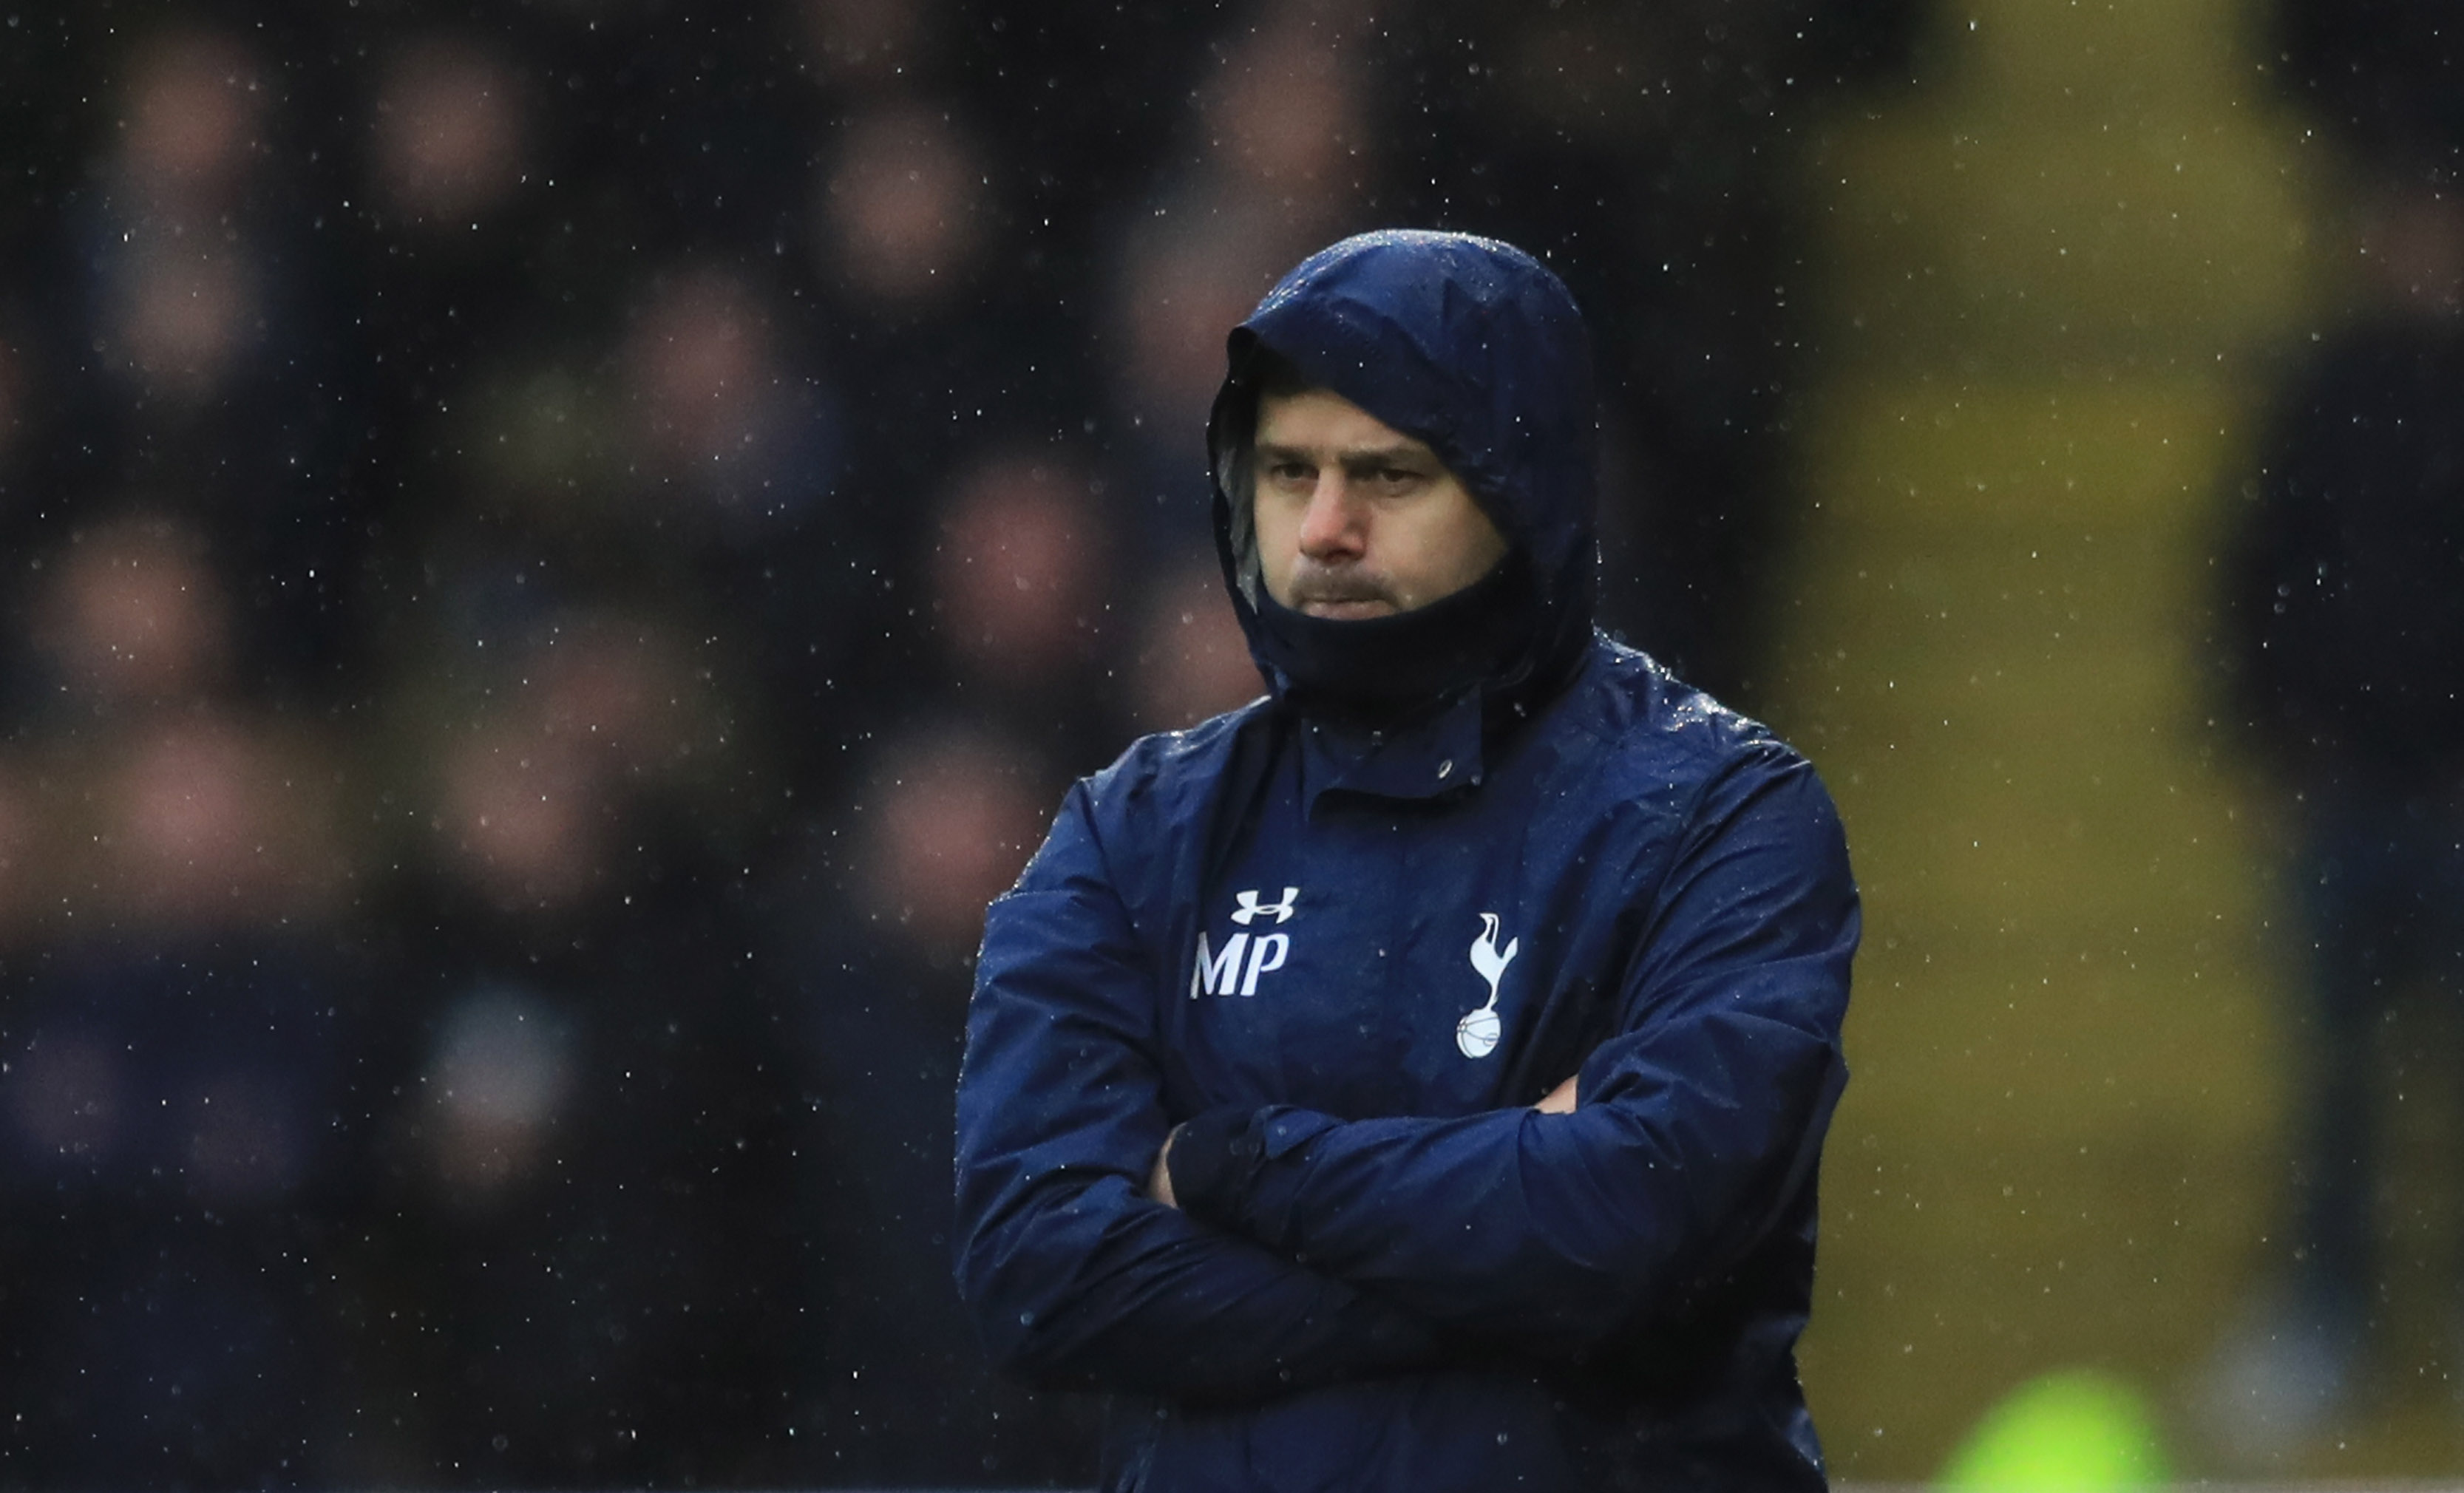 WATFORD, ENGLAND - JANUARY 01:  Mauricio Pochettino manager of Tottenham Hotspur looks on during the Premier League match between Watford and Tottenham Hotspur at Vicarage Road on January 1, 2017 in Watford, England.  (Photo by Richard Heathcote/Getty Images)